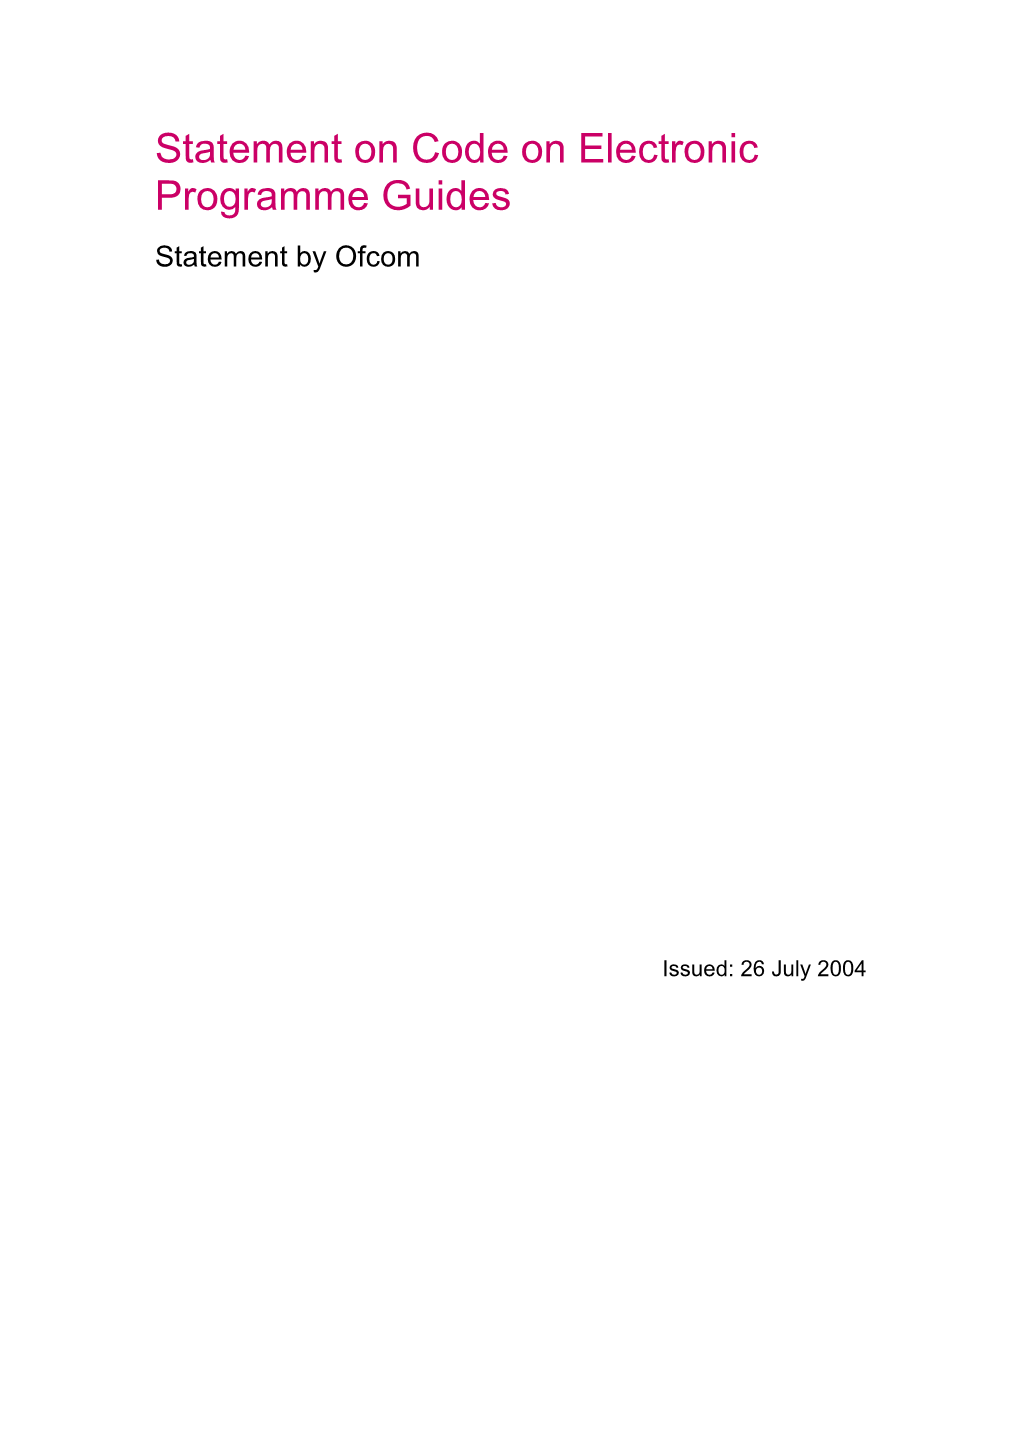 Statement on Code on Electronic Programme Guides Statement by Ofcom